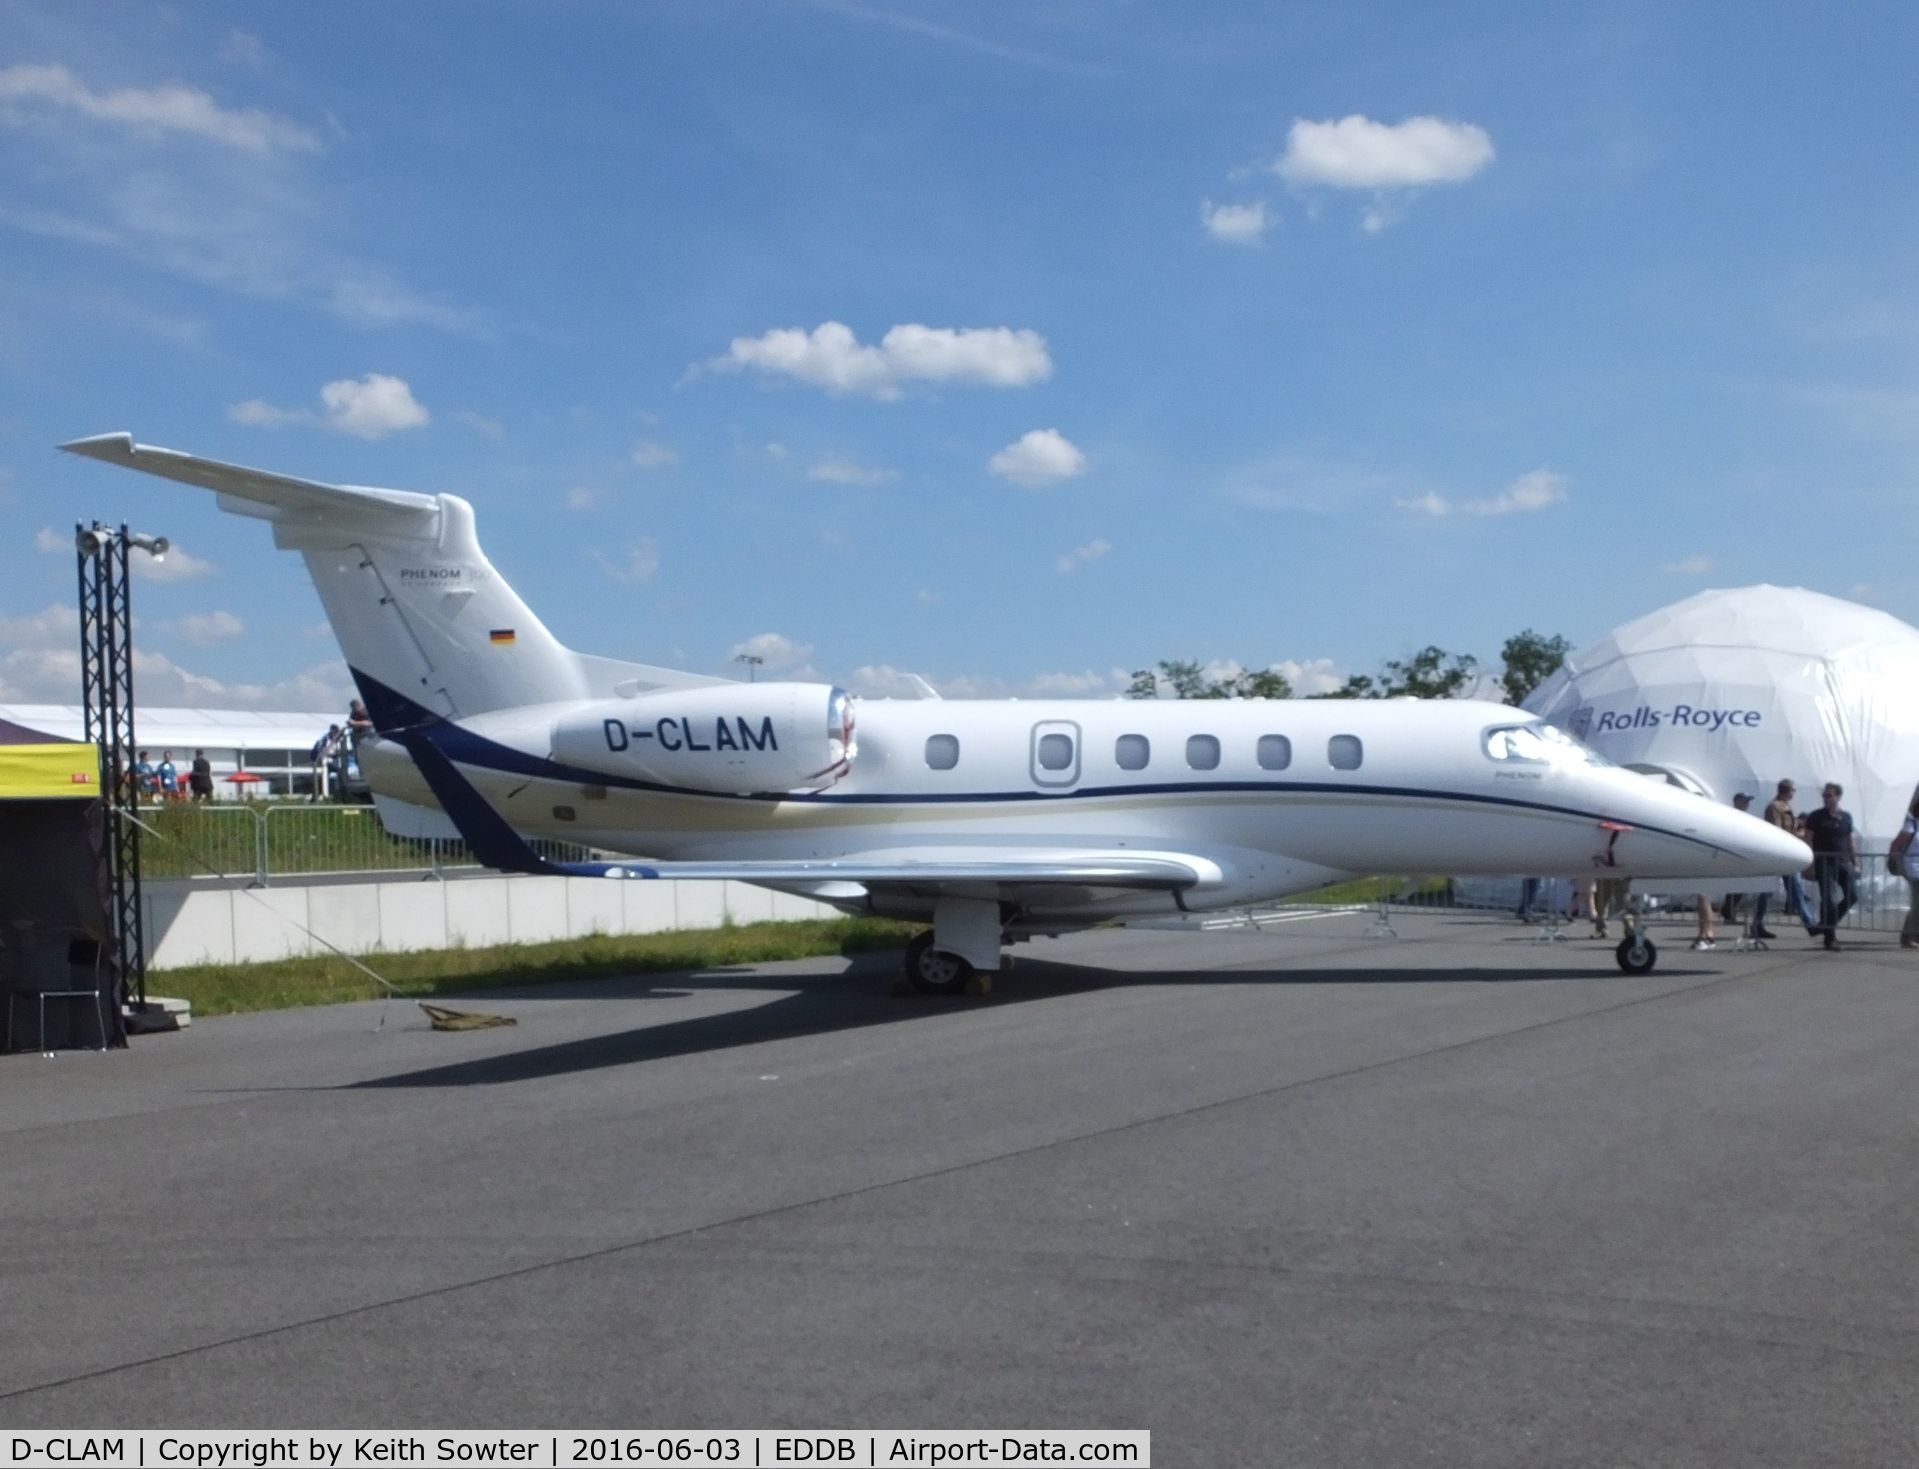 D-CLAM, 2012 Embraer EMB-505 Phenom 300 C/N 50500108, At the Berlin ILA Airshow 2016